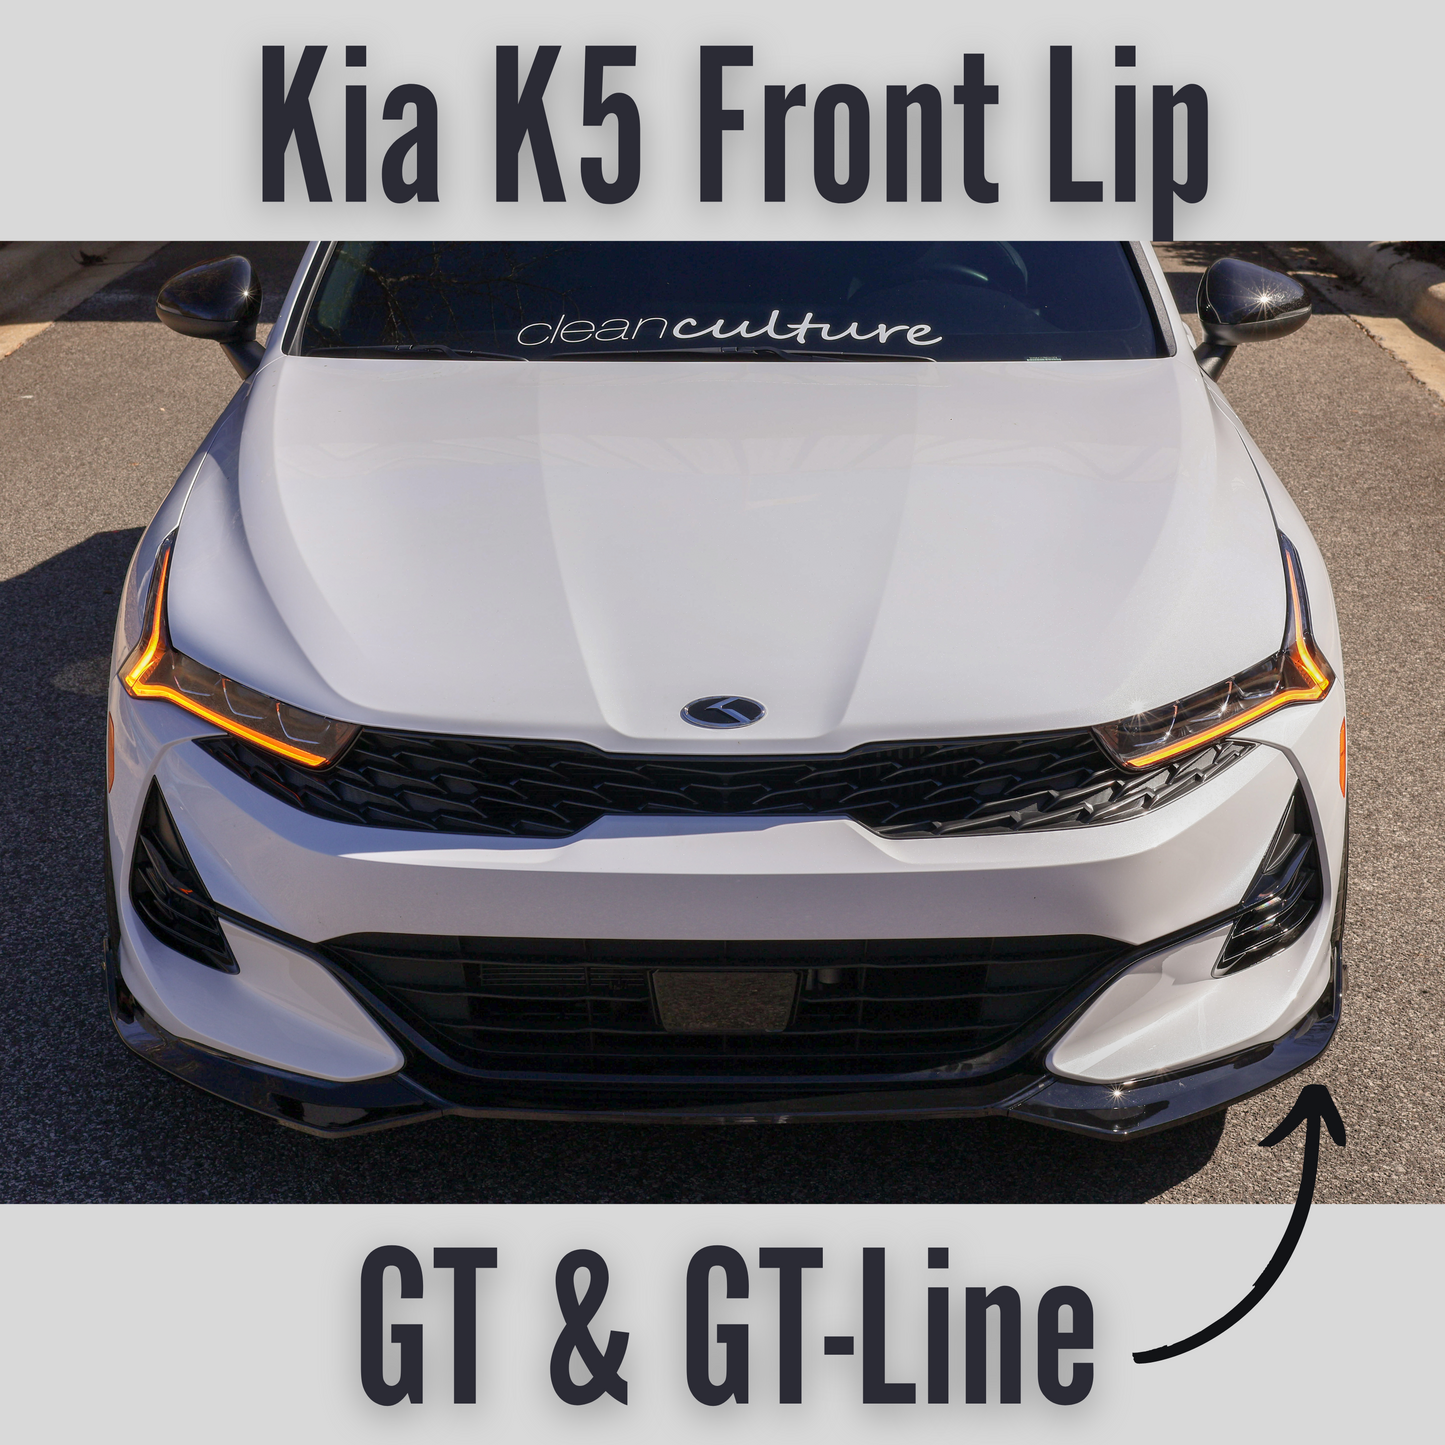 Front Lip for Kia K5 GT-Line & GT | Easy Installation with 3M Tape & Screws